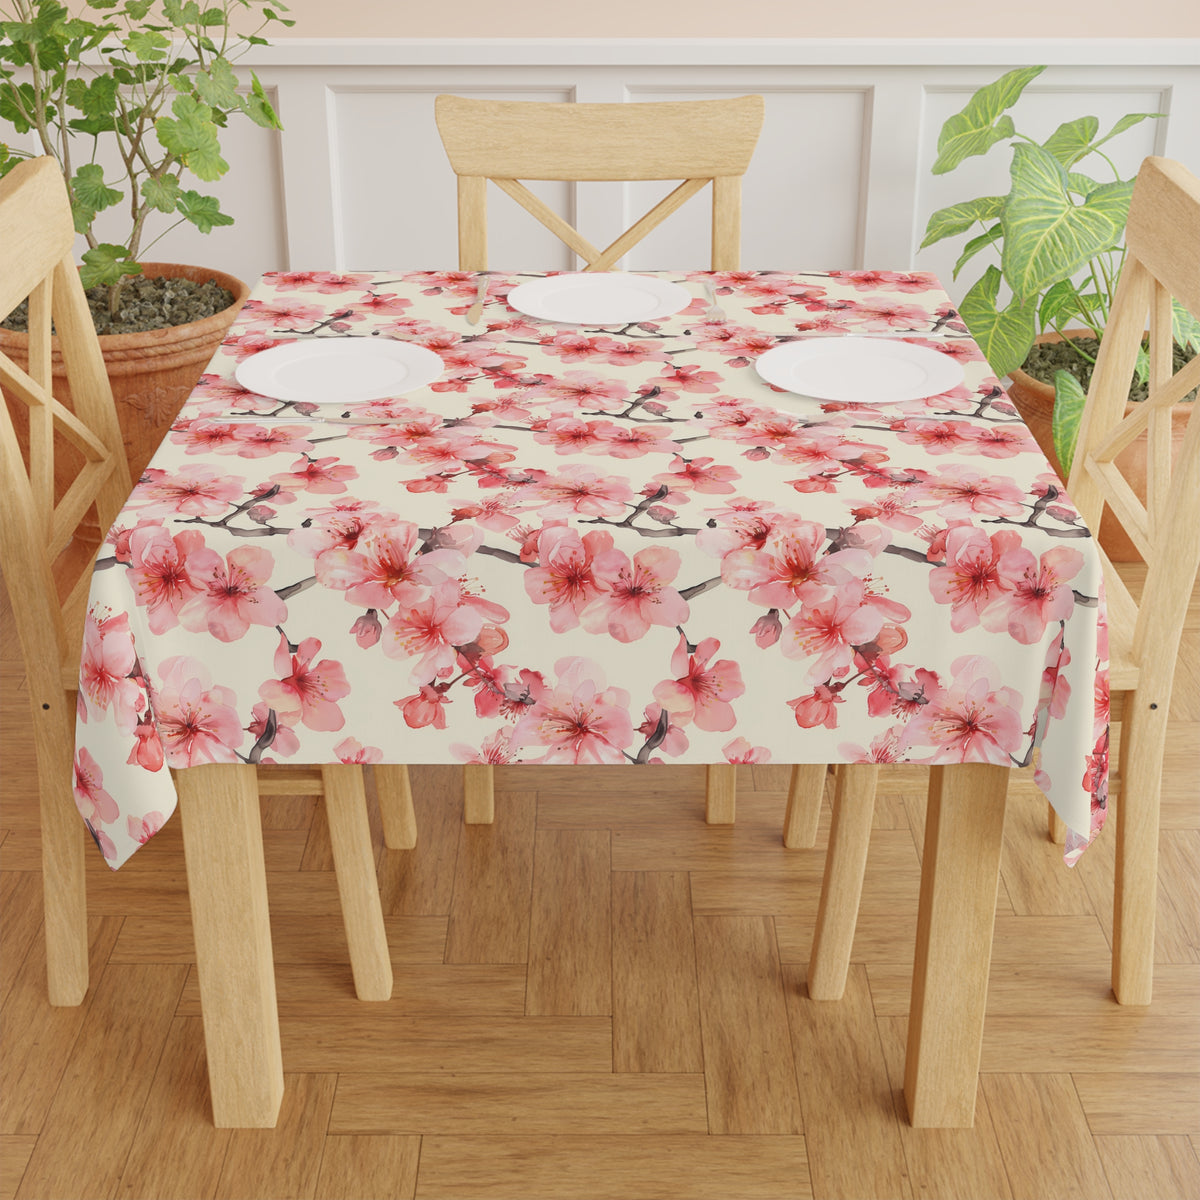 Decorative Tablecloth with Sakura Cherry Blossoms, Durable Polyester (55.1&quot; x 55.1&quot;)